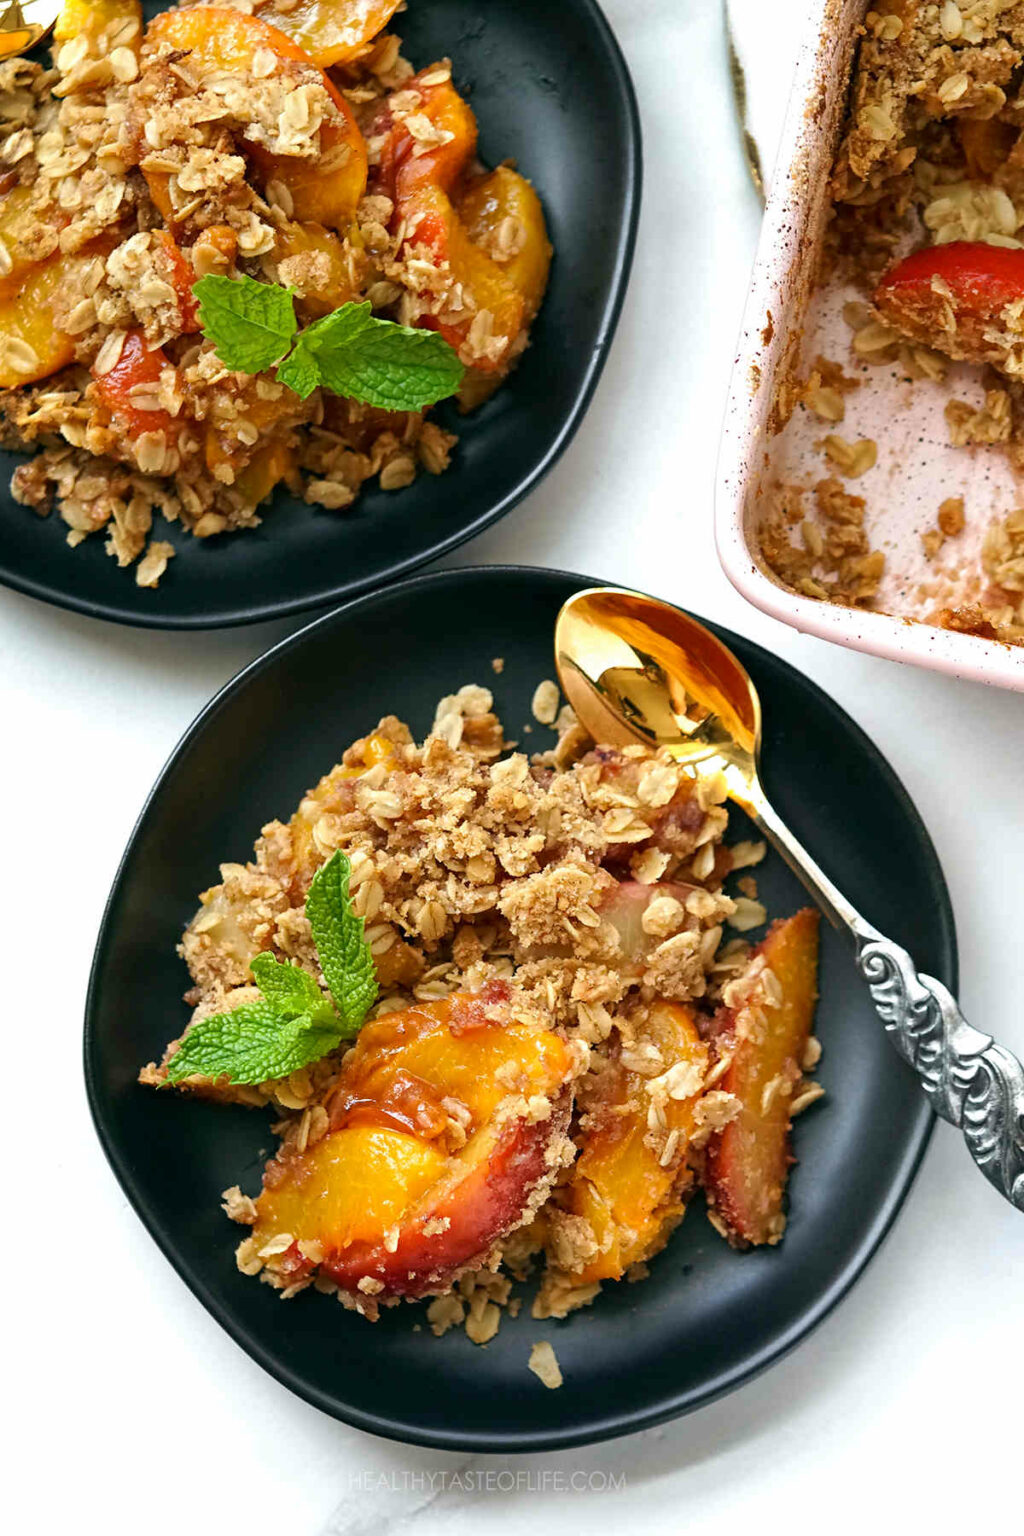 Peach Crisp With Oat Crumble Recipe | Healthy Taste Of Life